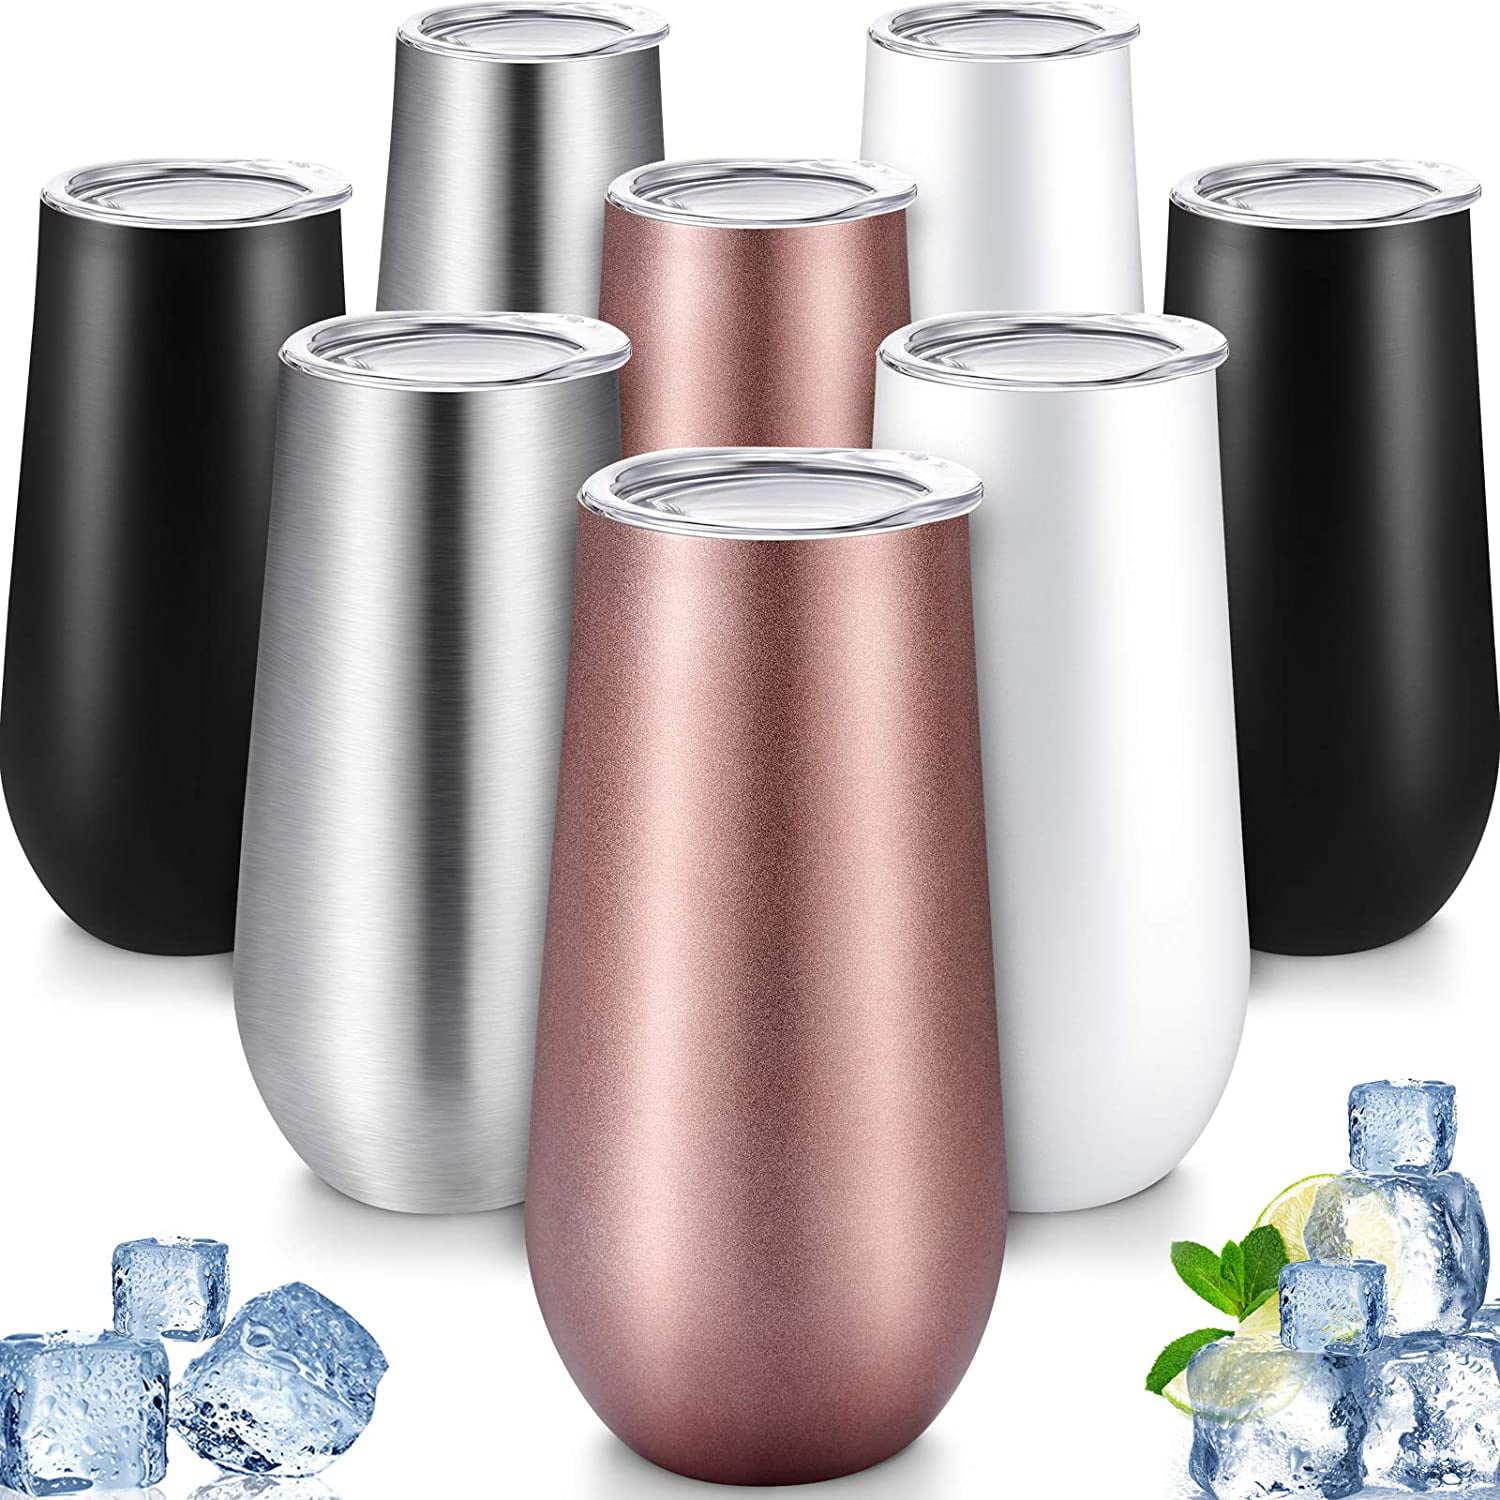 Champagne Flute Set 9oz Holiday Stainless Steel Tumblers The SLEEK 